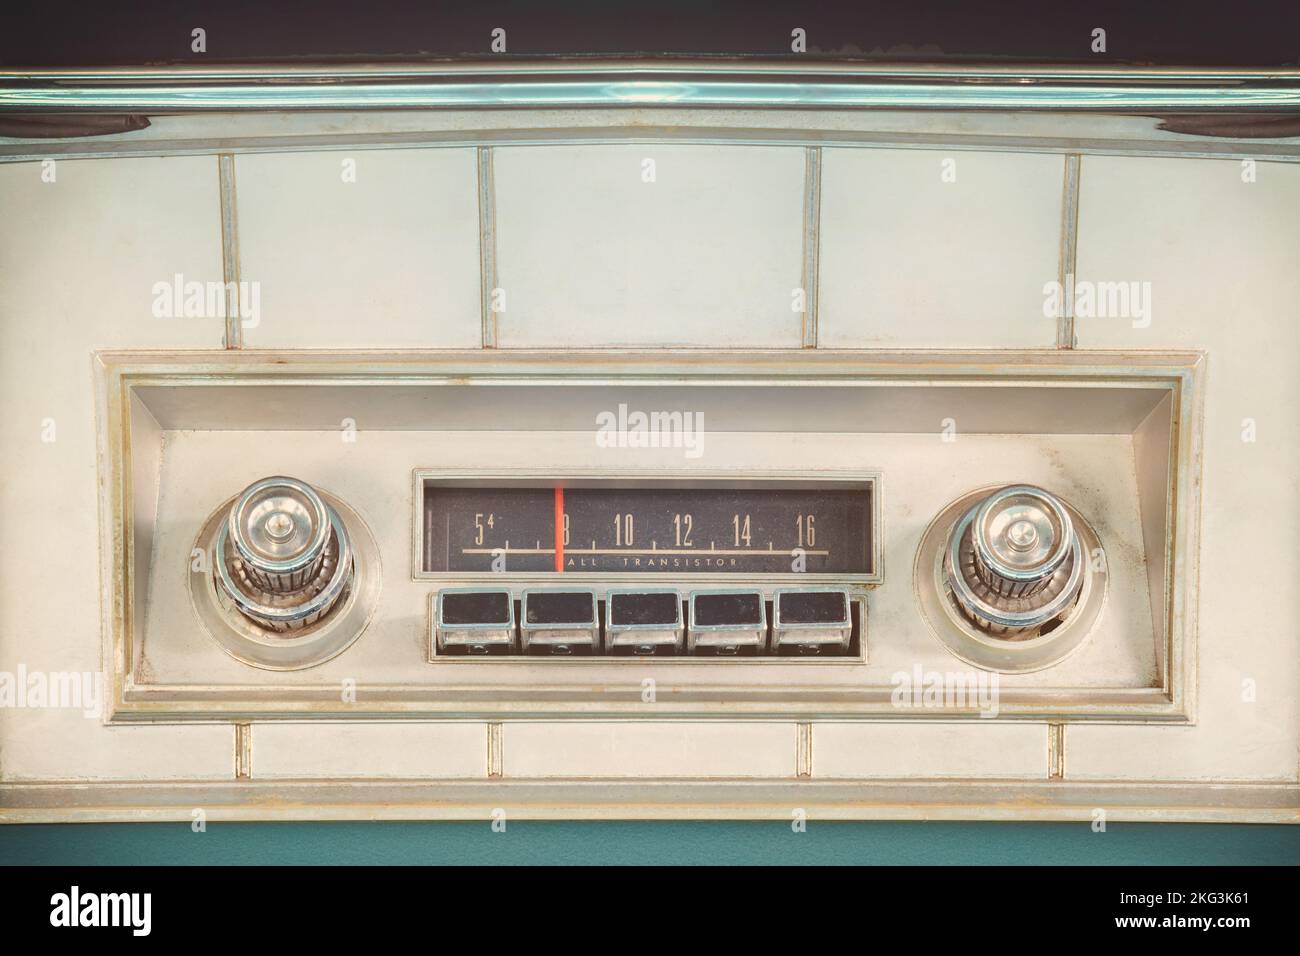 Old car radio inside a green classic American car with chrome dashboard Stock Photo